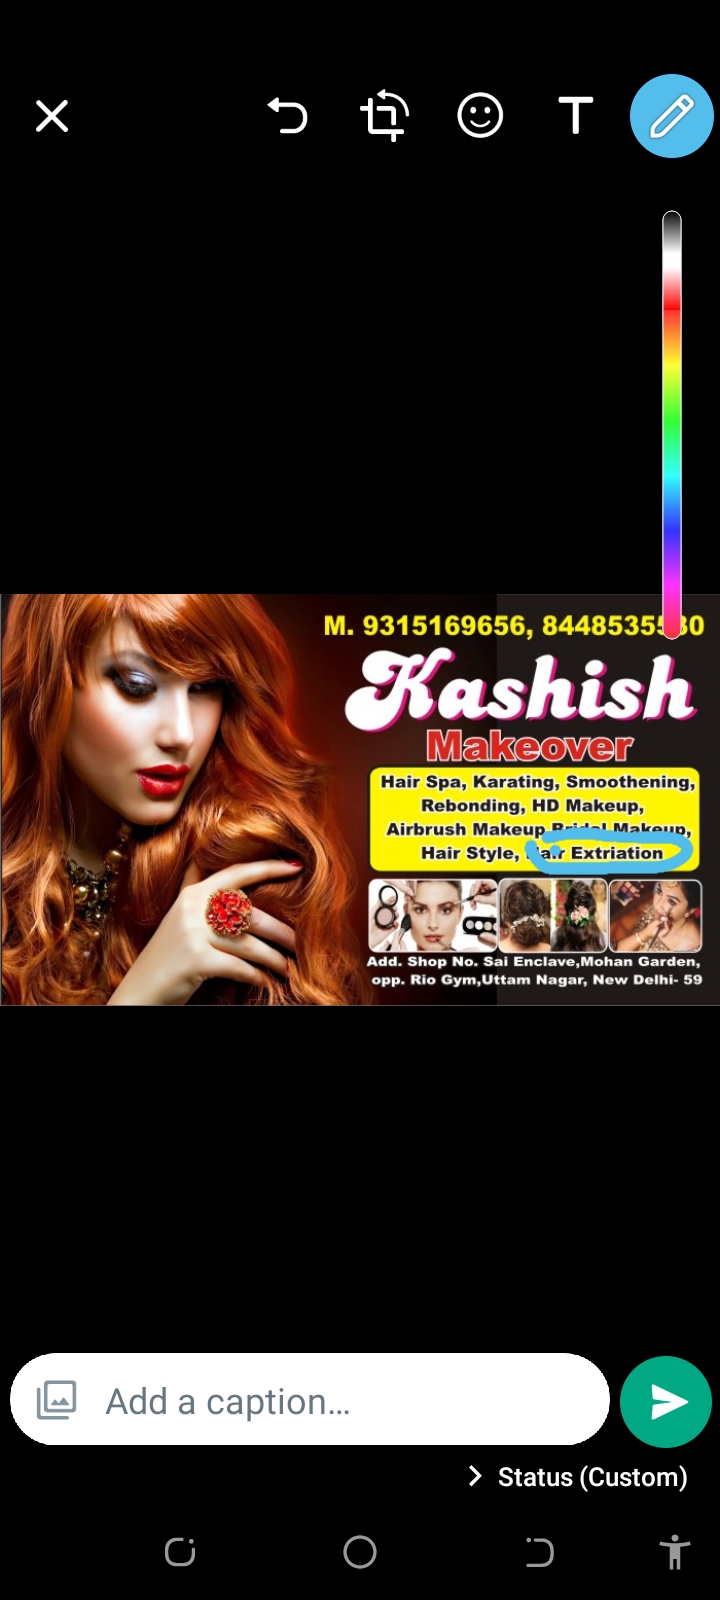 Today’s Best Offers Kashish Makeover